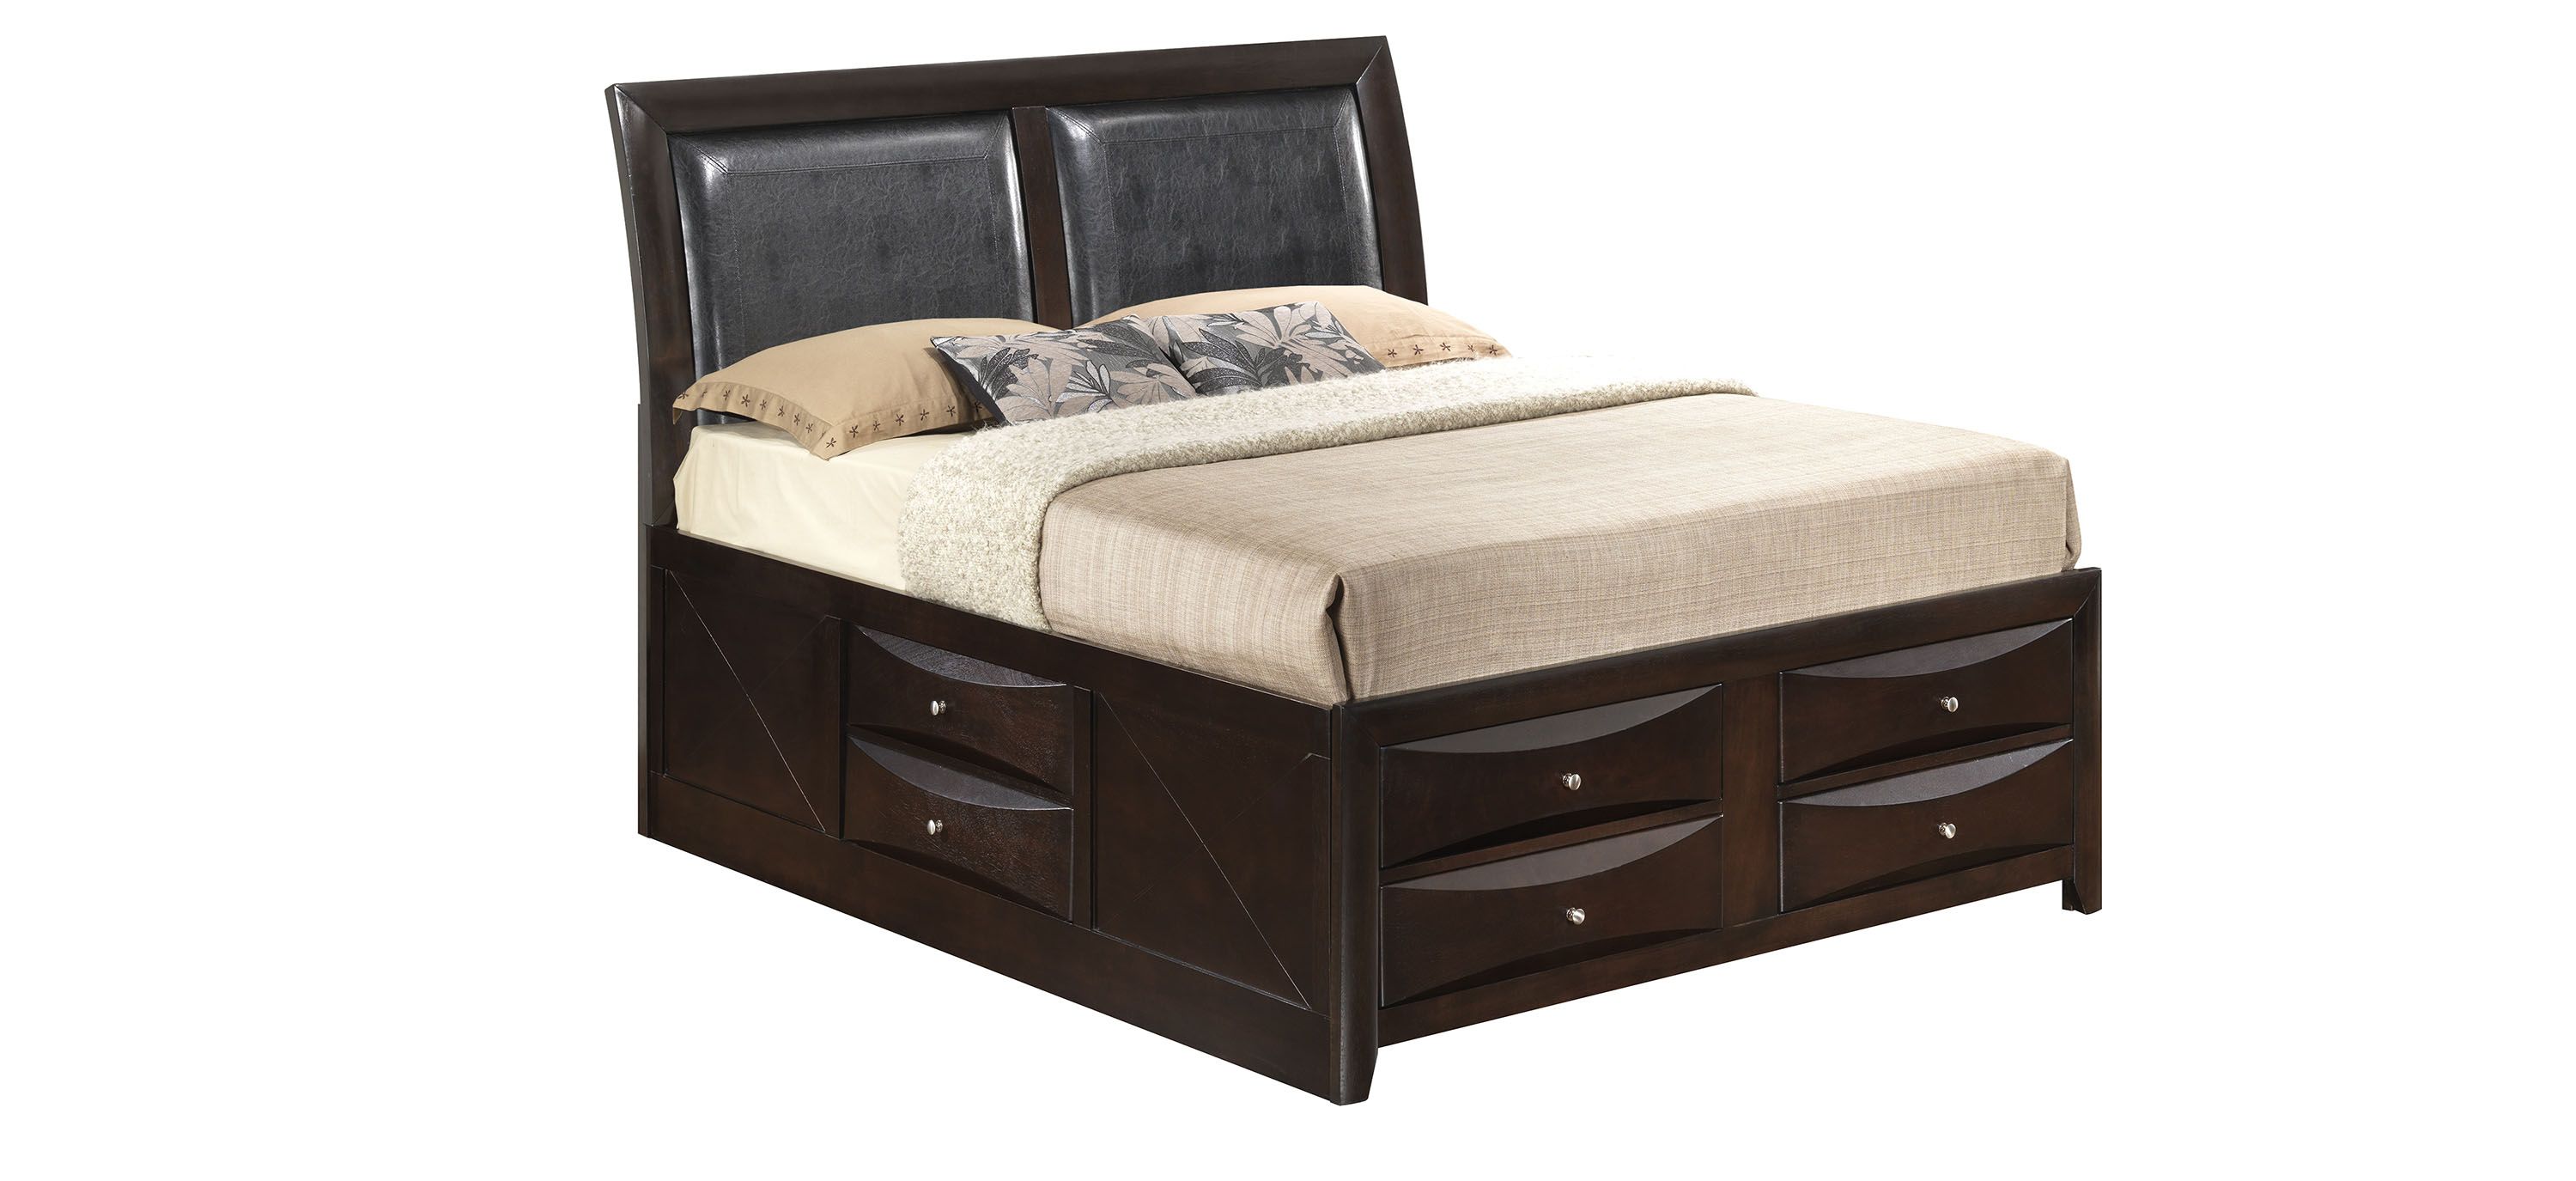 Marilla Upholstered Captain%27s Bed